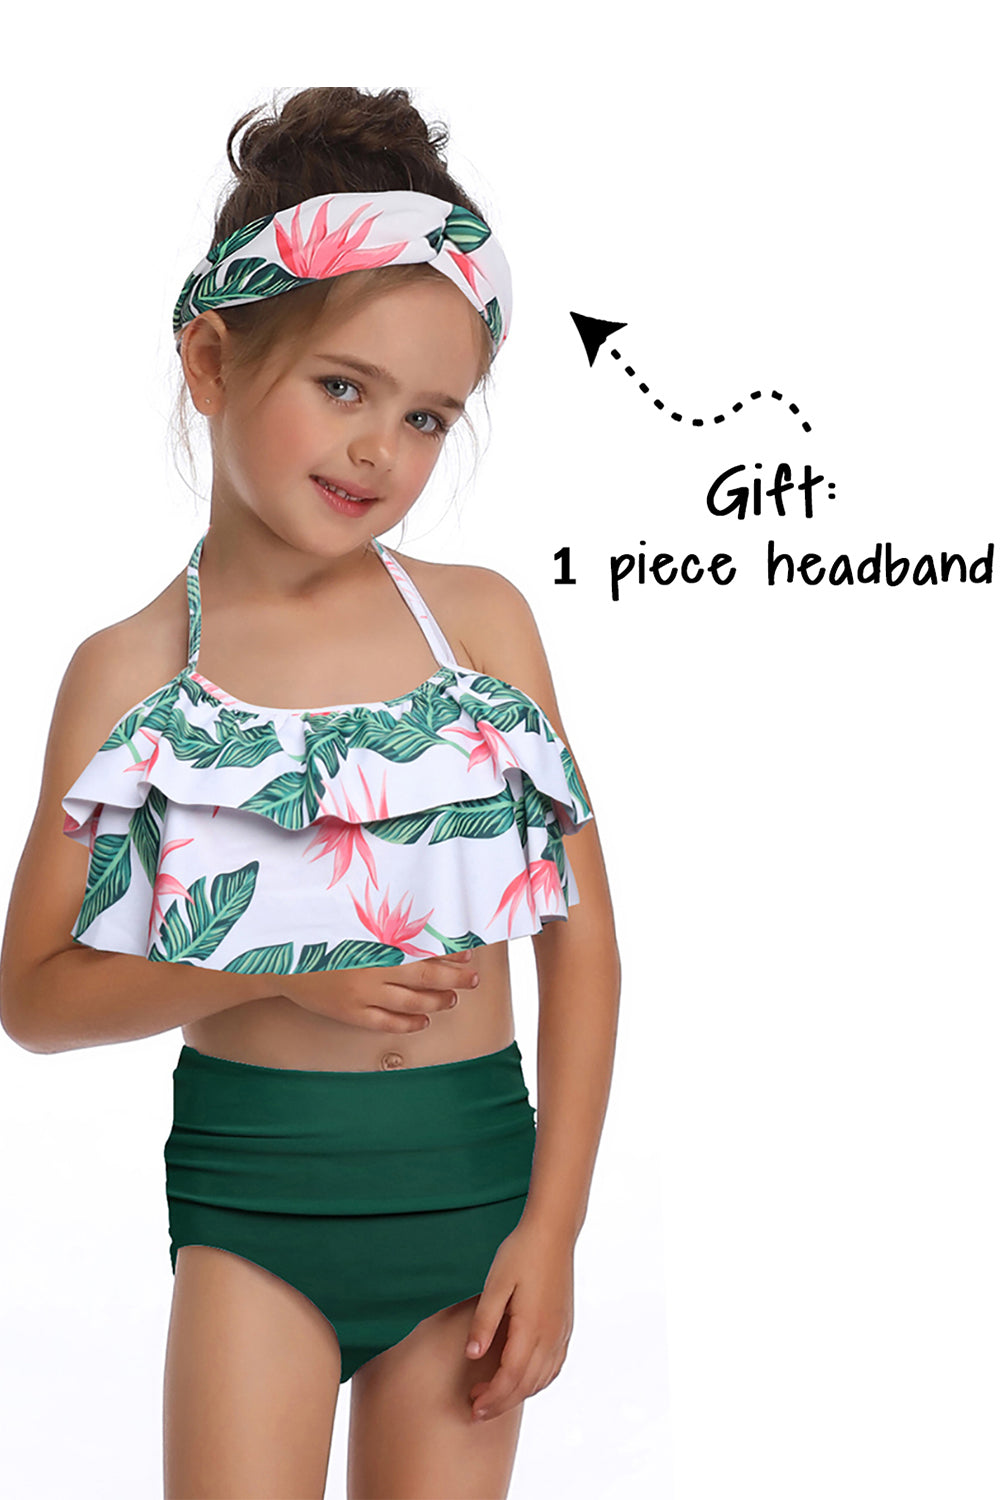 Mommy and Me Matching Family Swimsuit Womens Girls Suit Matching Swimwear Set with Headband